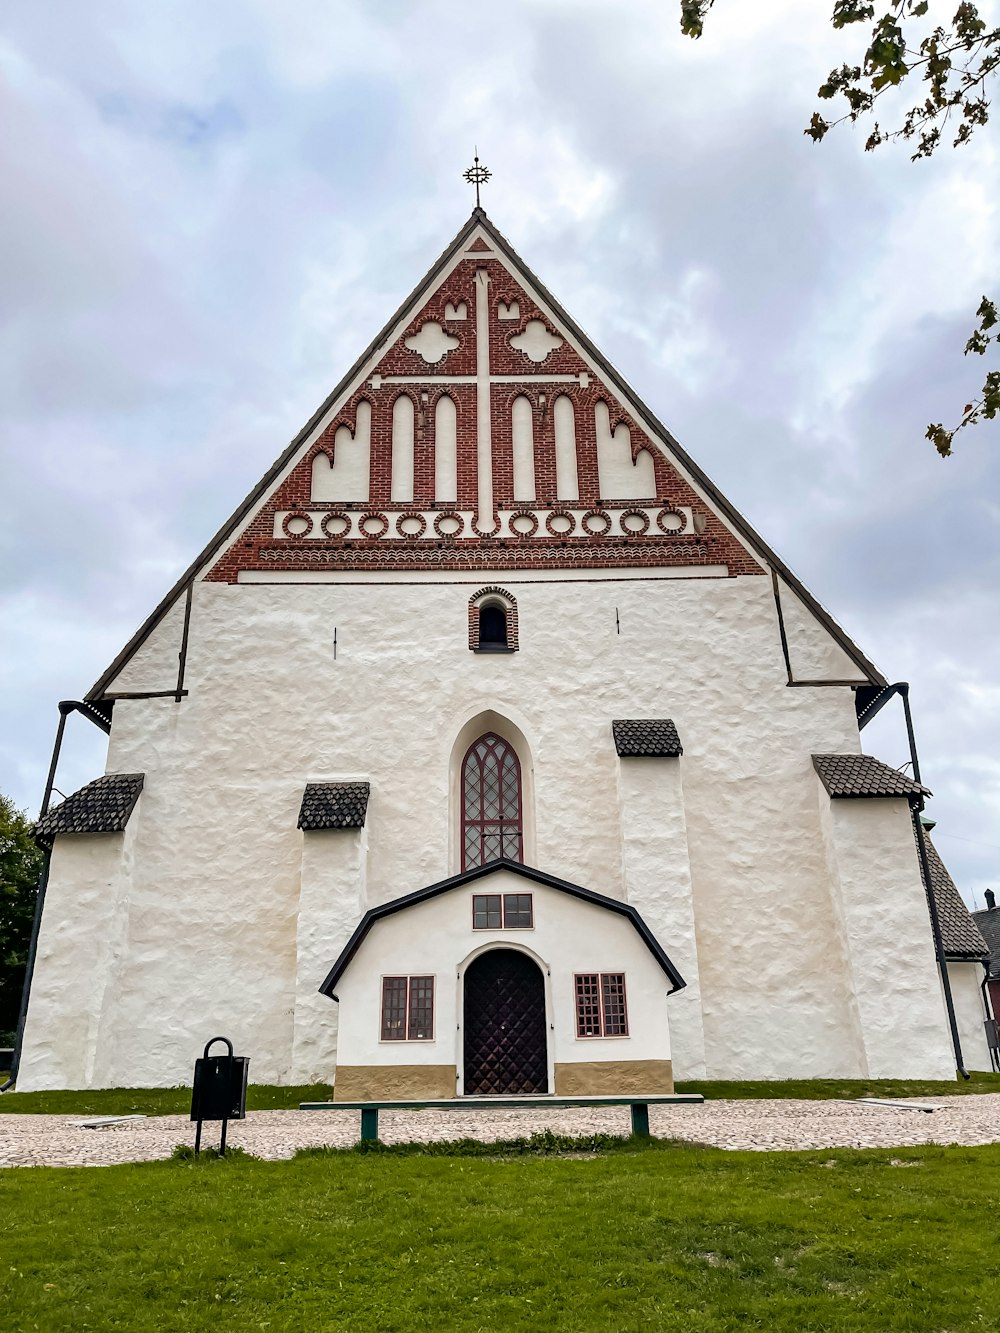 a white church with a red and white roof